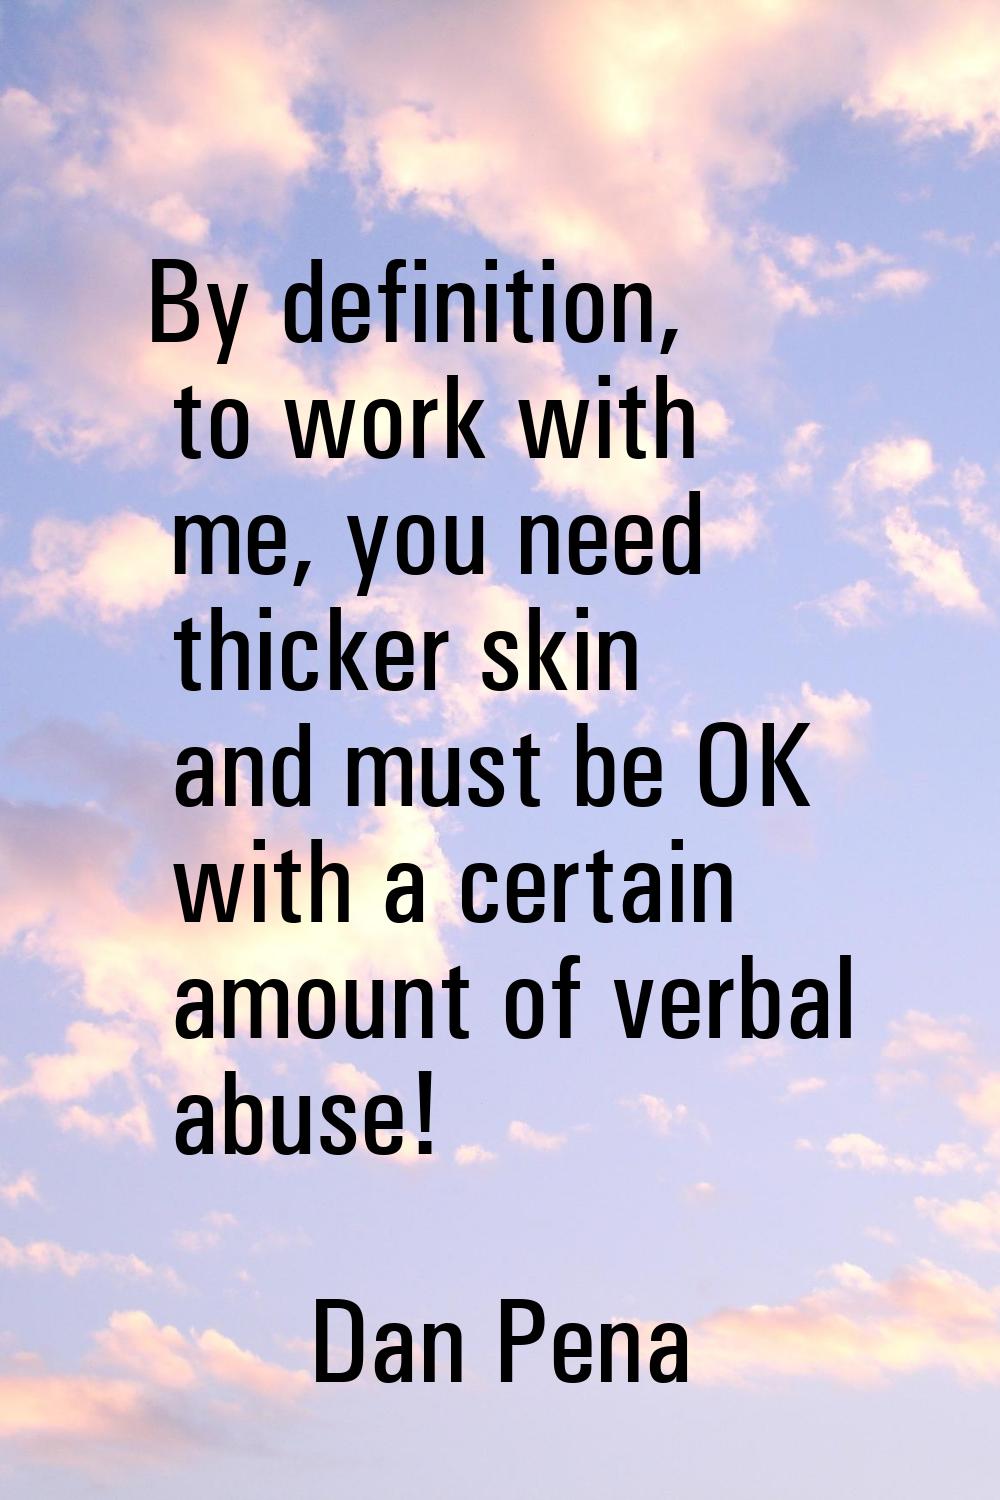 By definition, to work with me, you need thicker skin and must be OK with a certain amount of verba